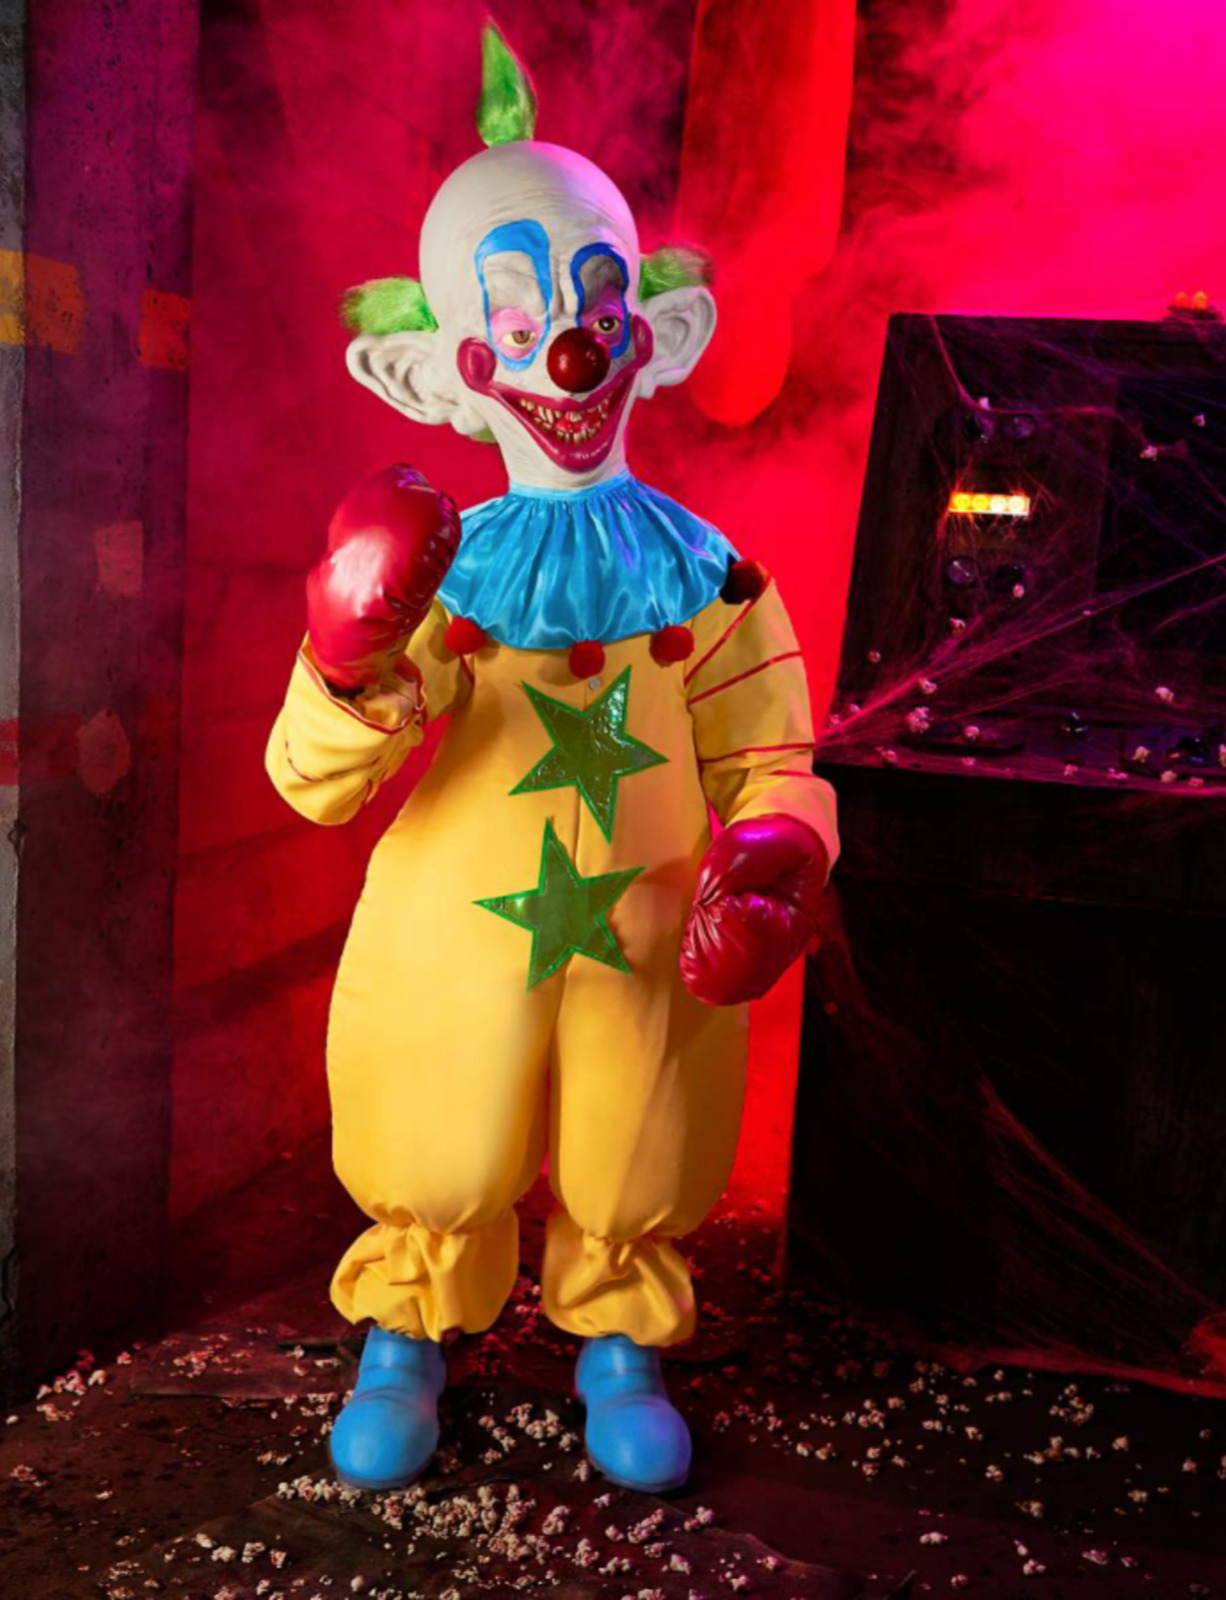 Shorty 5 Ft. Animatronic Decoration Halloween Killer Klowns from Outer Space Fun